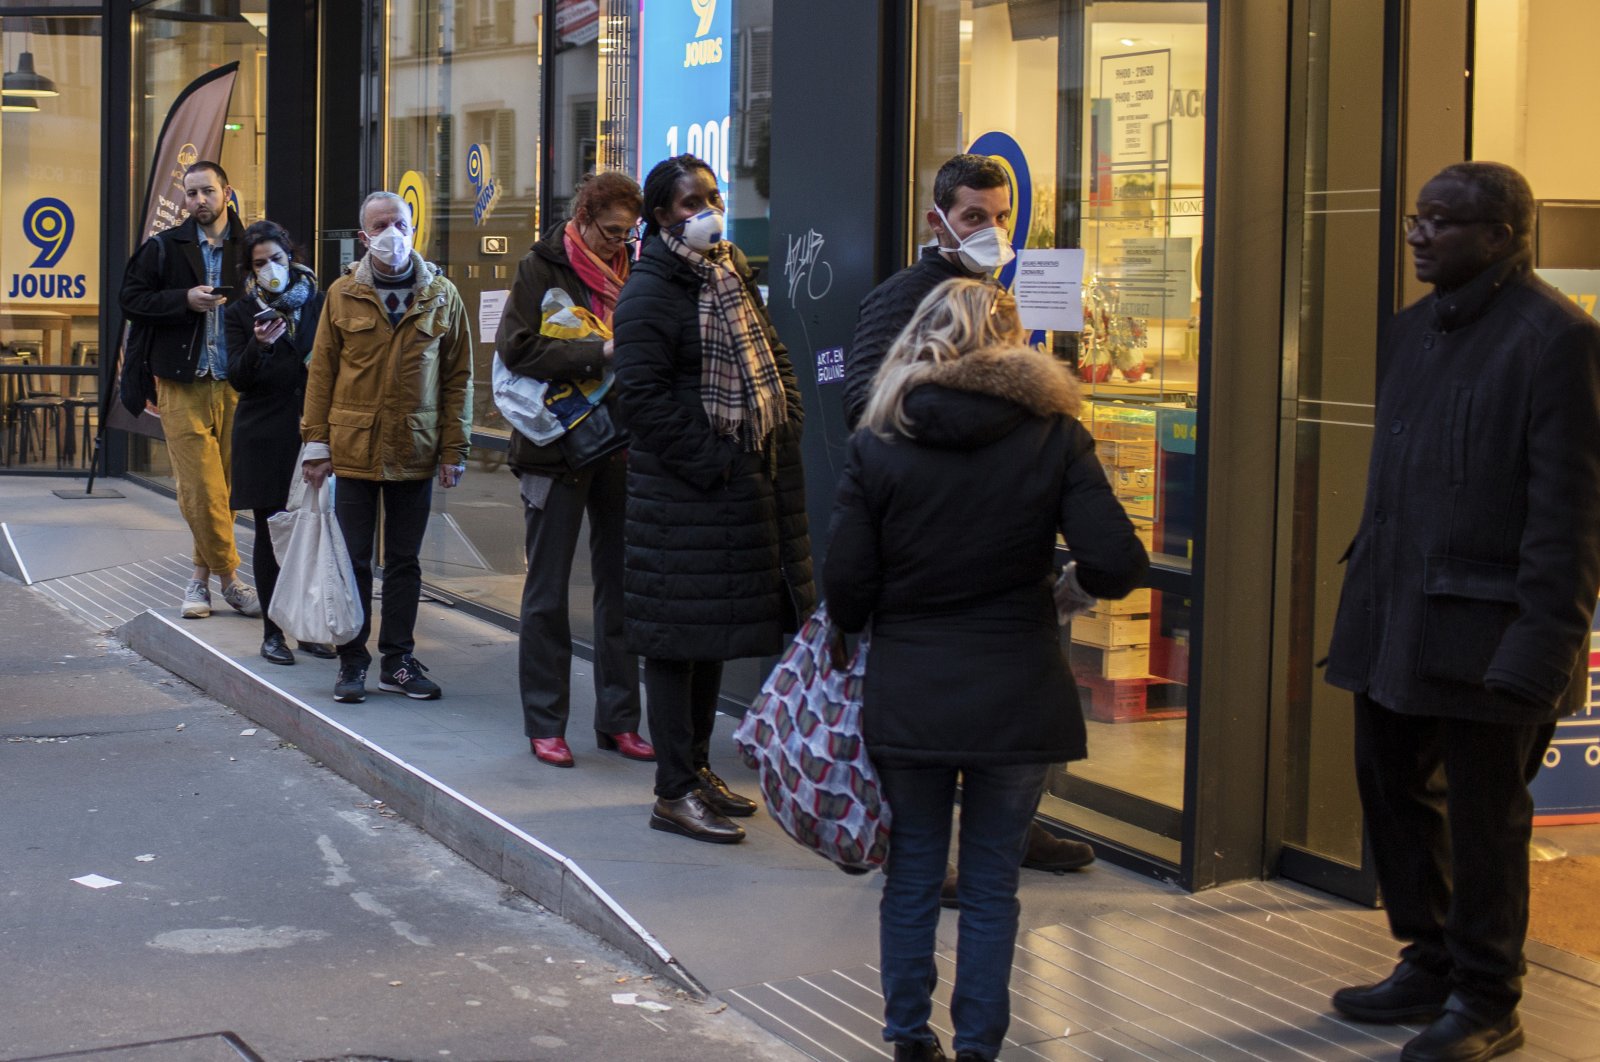 People wearing protective masks line up using social distancing to queue at a supermarket in Paris, Monday, March 16, 2020. (AP Photo)